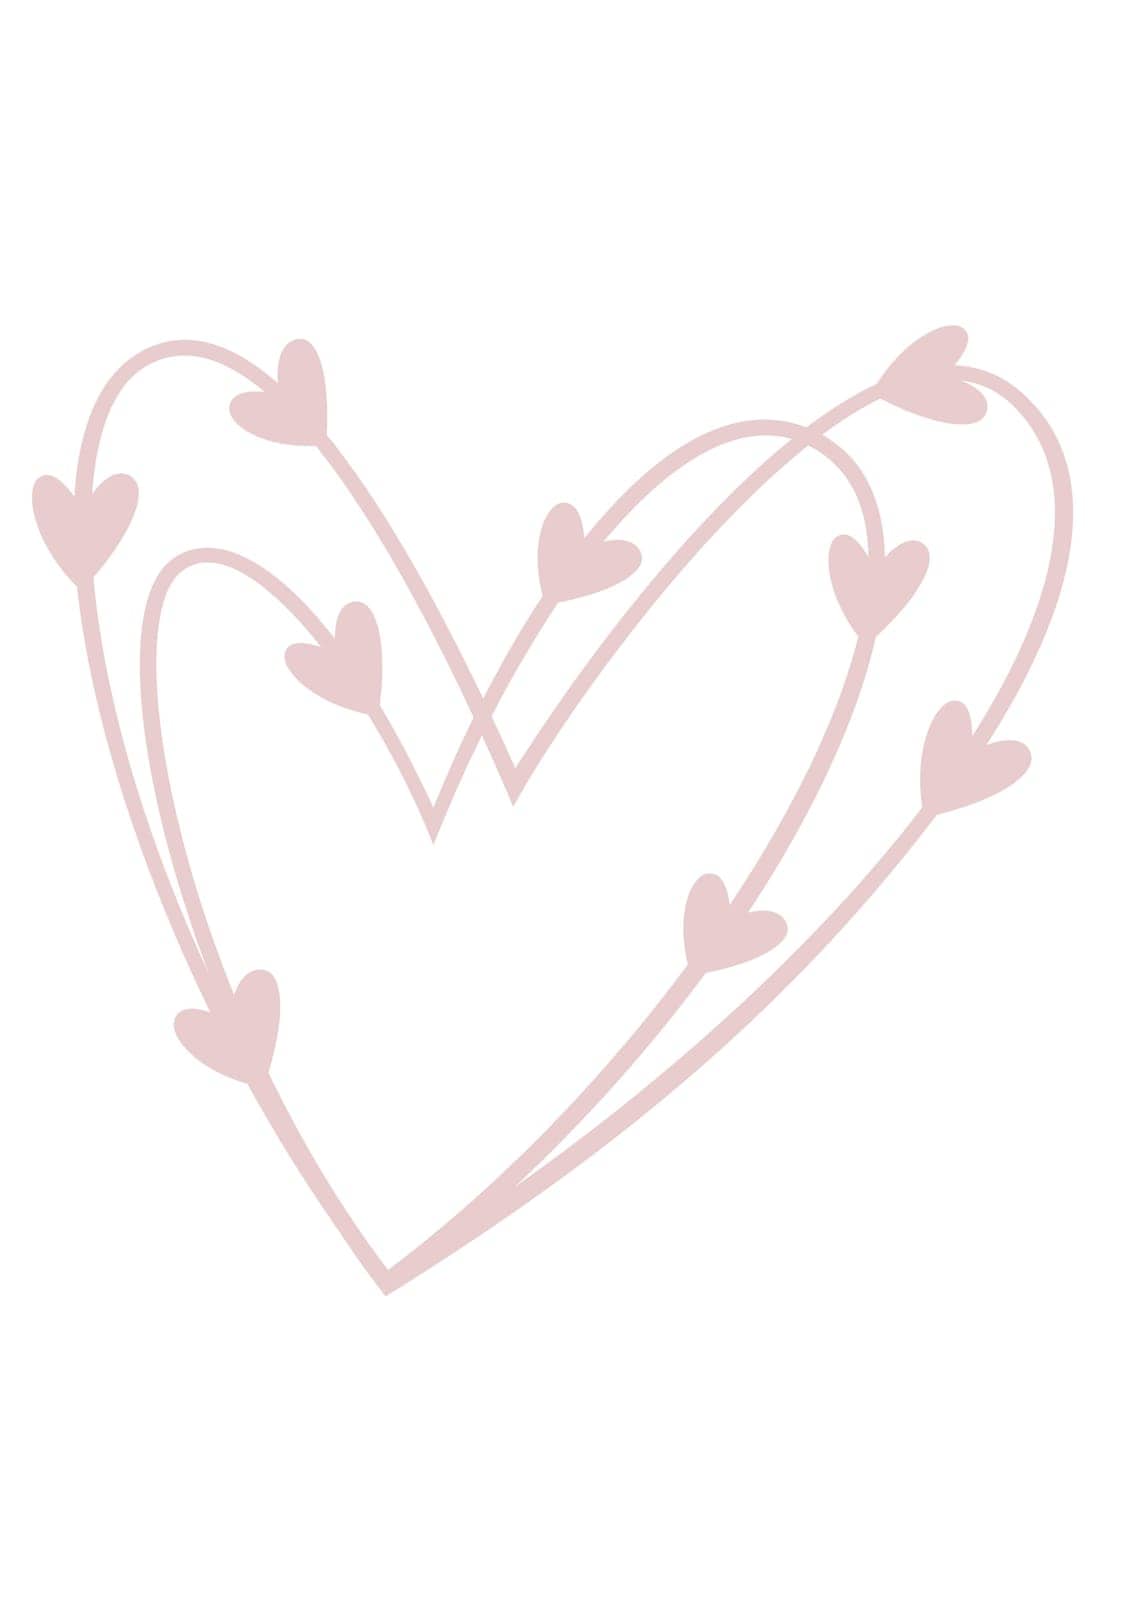 Boho heart with transparent background